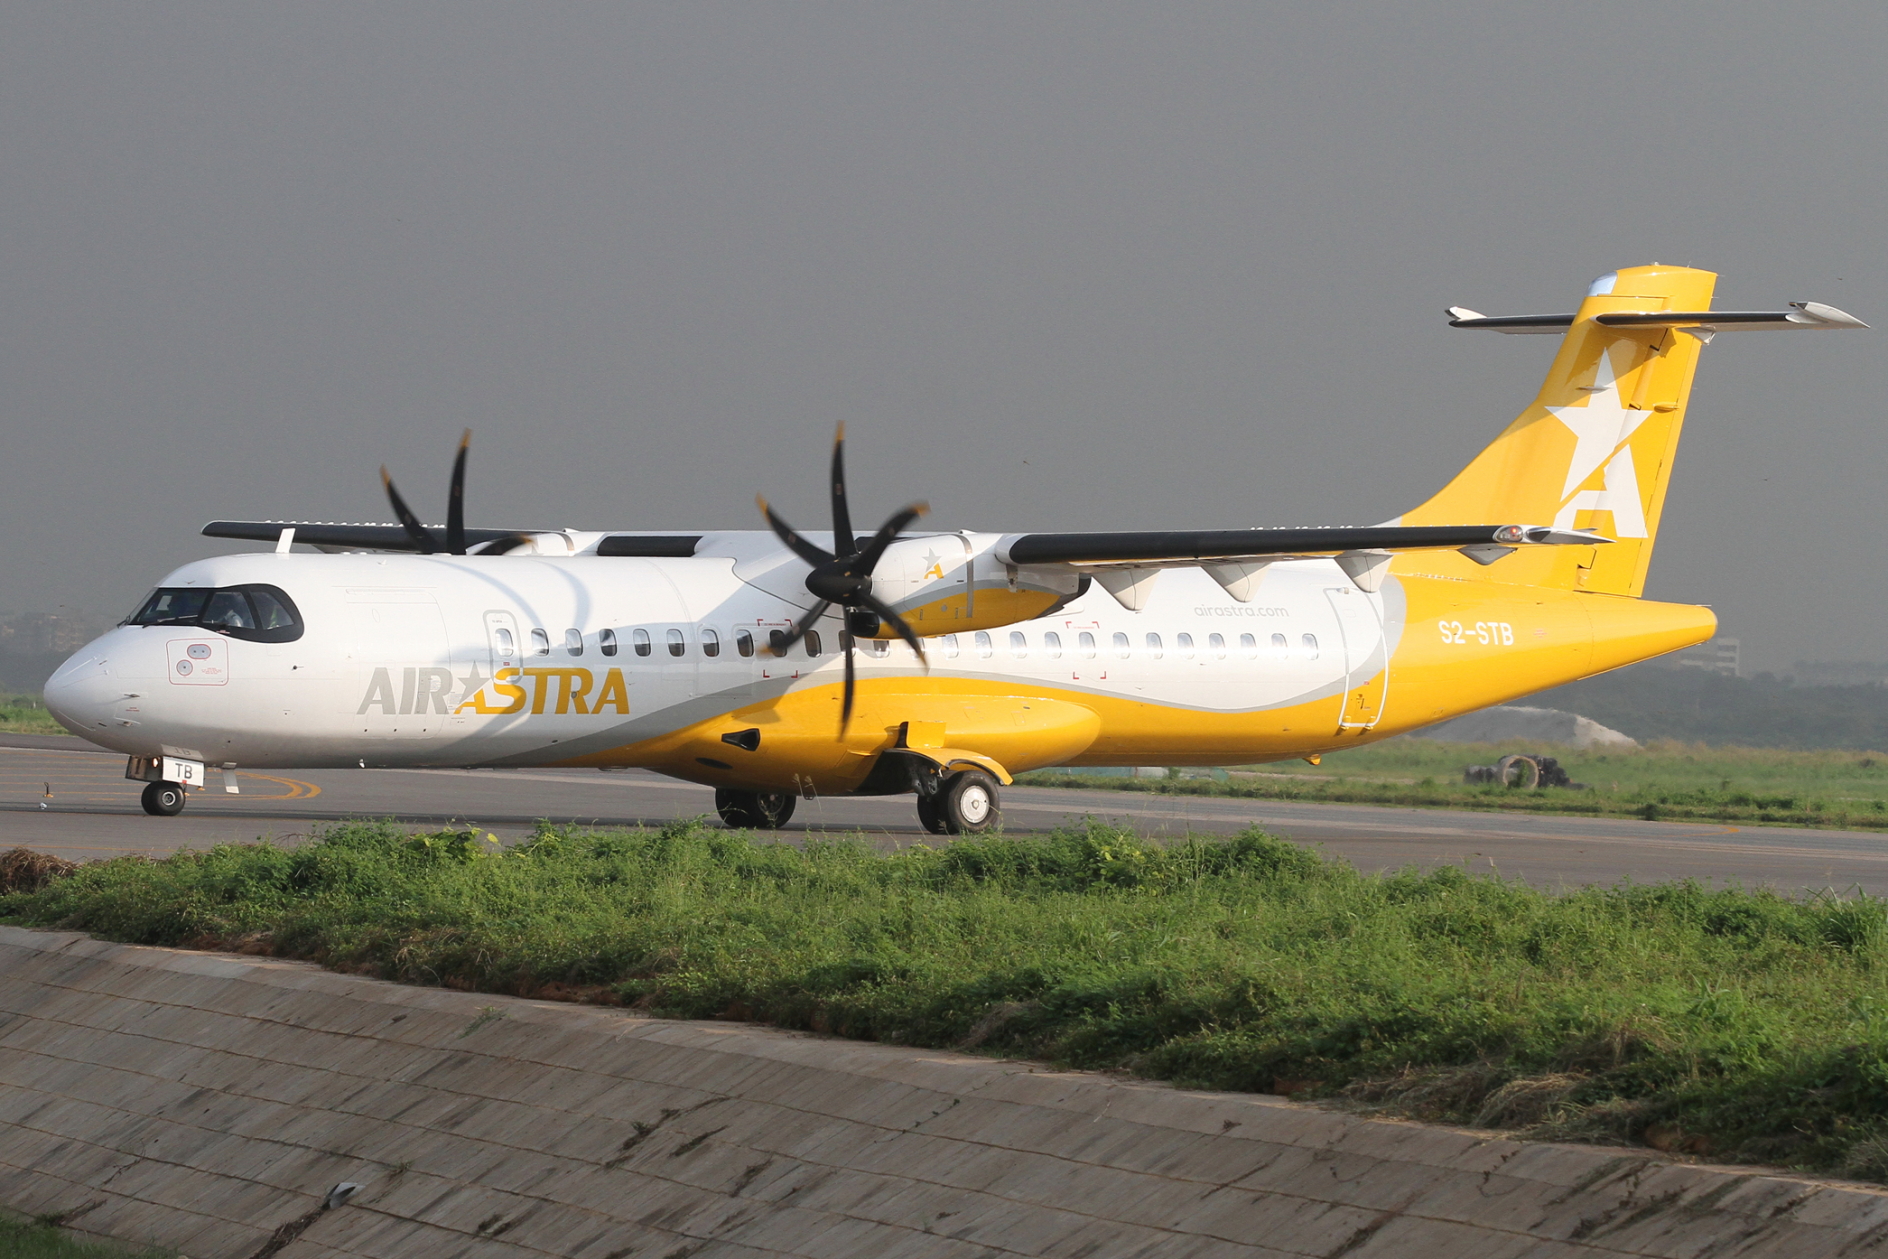 Air Astra ATR 72-600 reg: S2-STB. Click to enlarge.